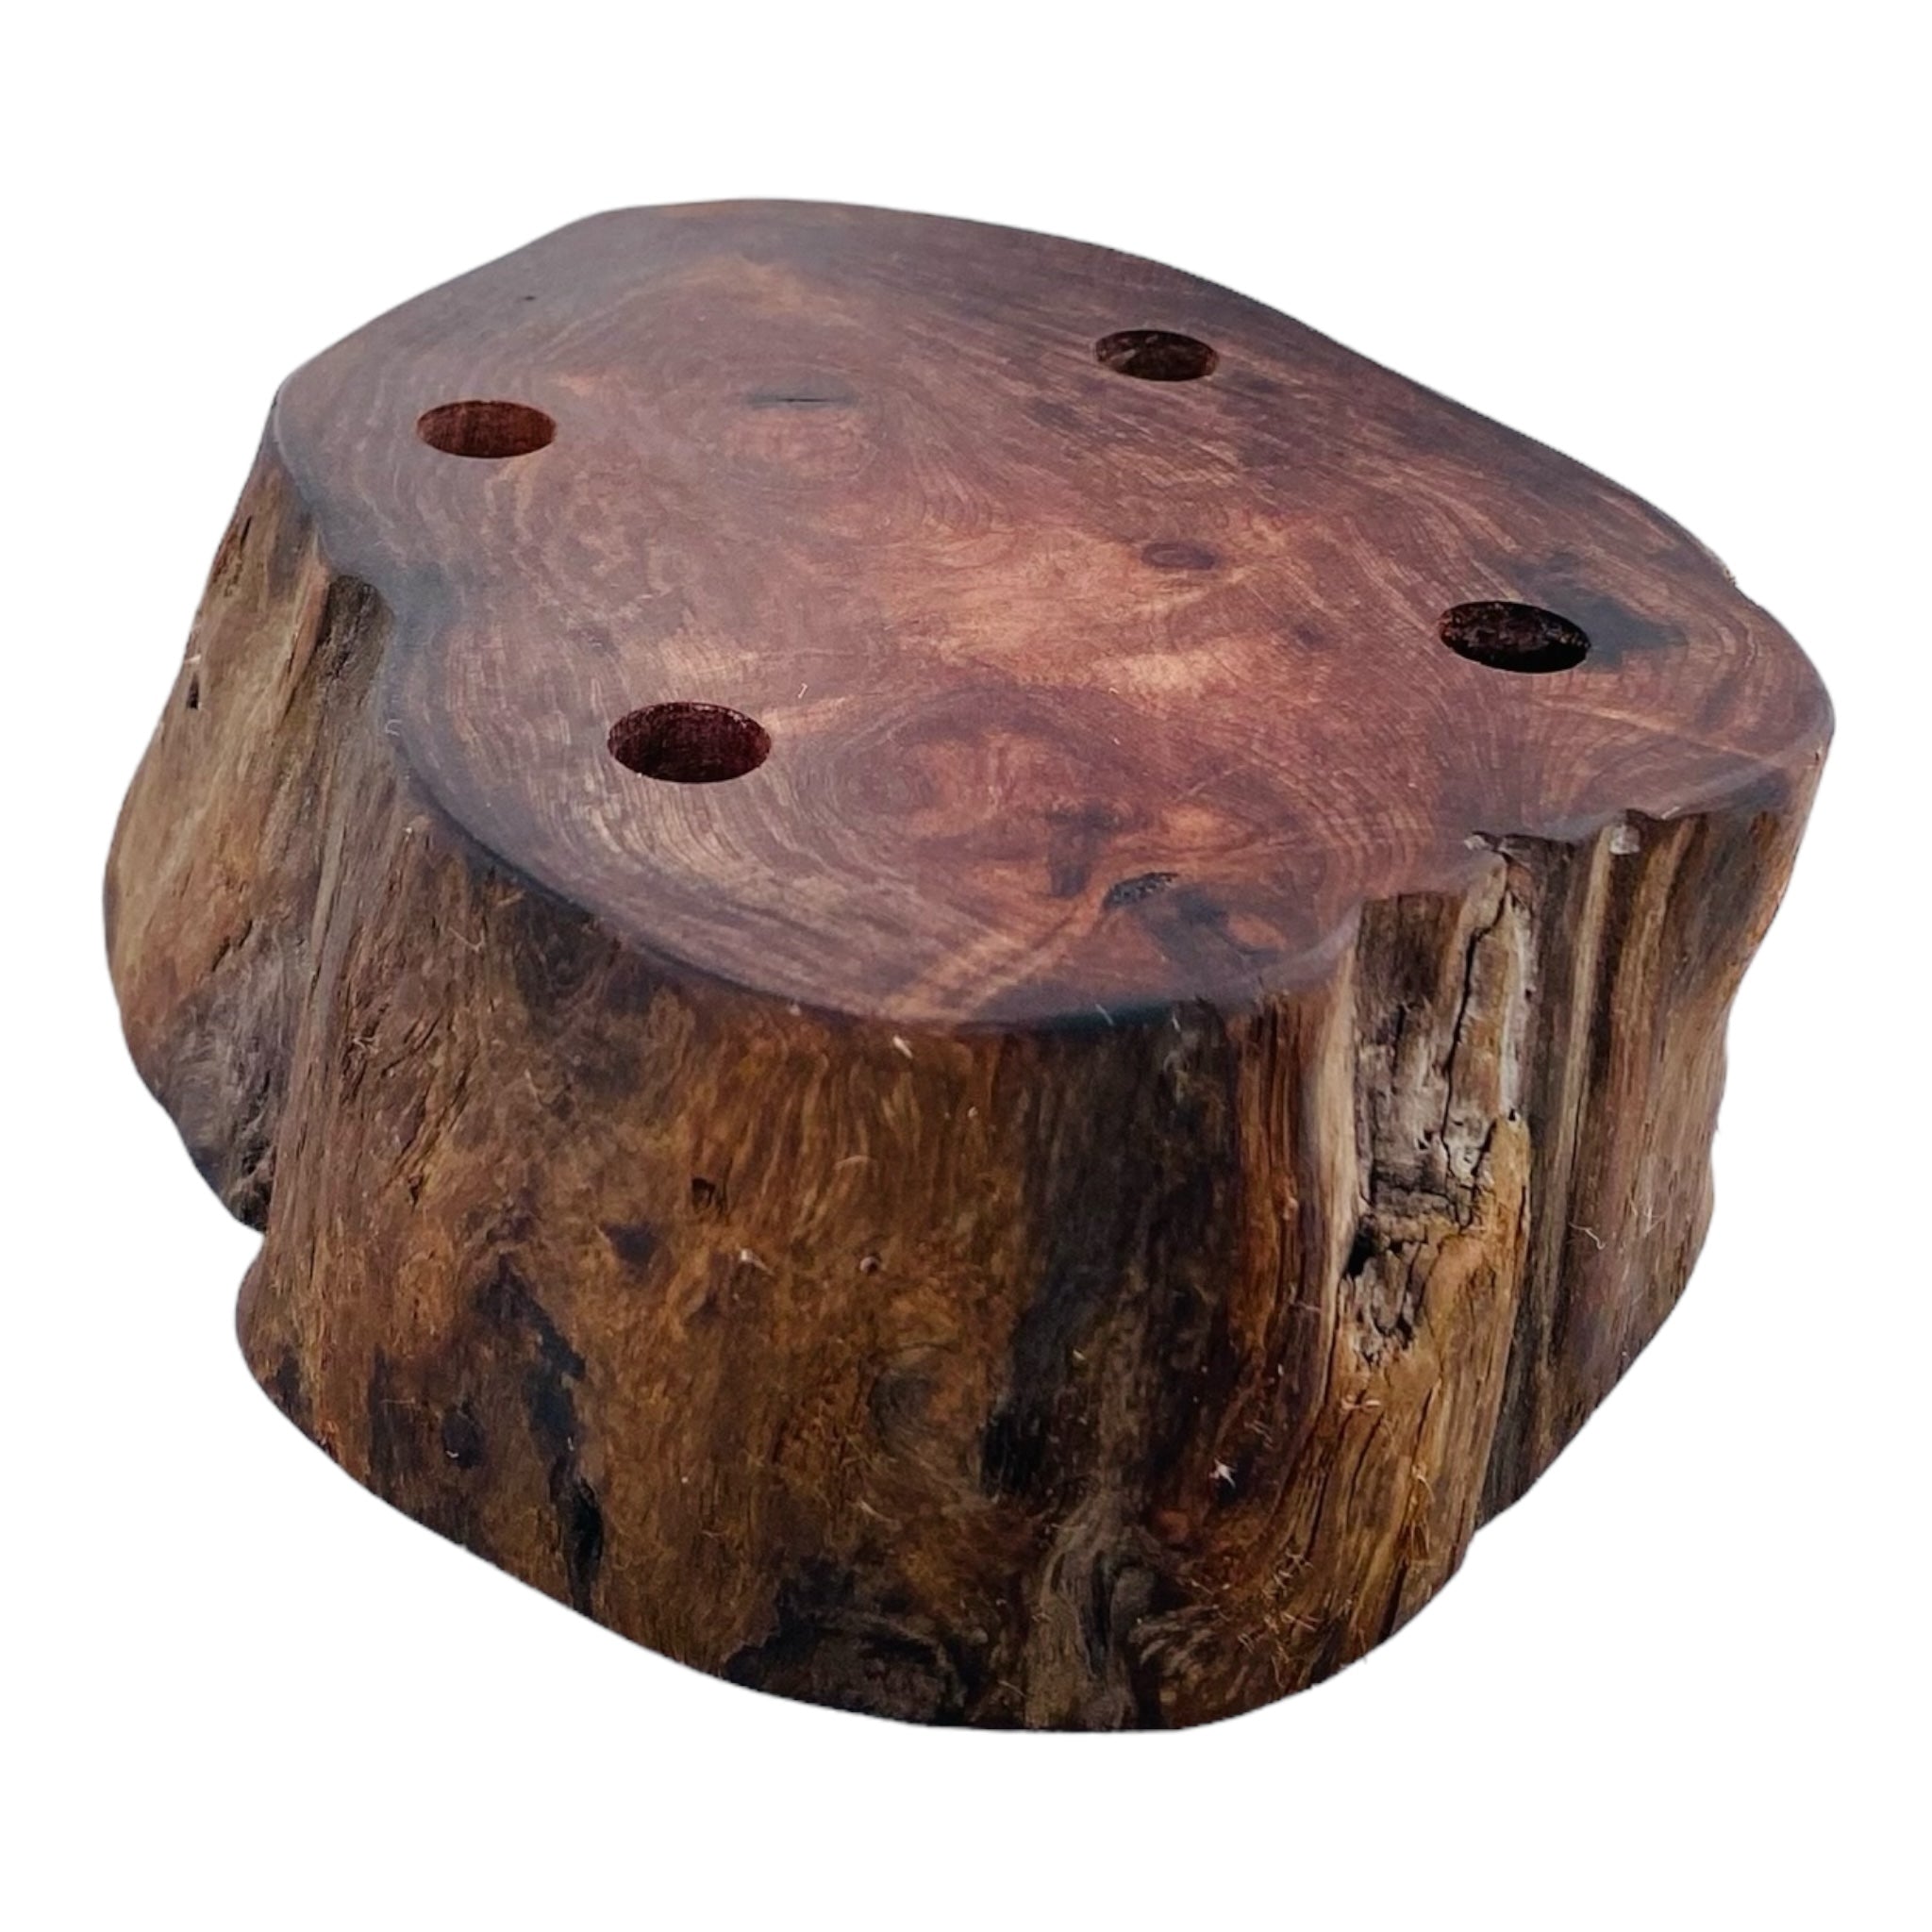 4 Hole Wood Display Stand Holder For 10mm Bong Bowl Pieces Or Quartz Bangers - Red Wood Burl With Live Edge